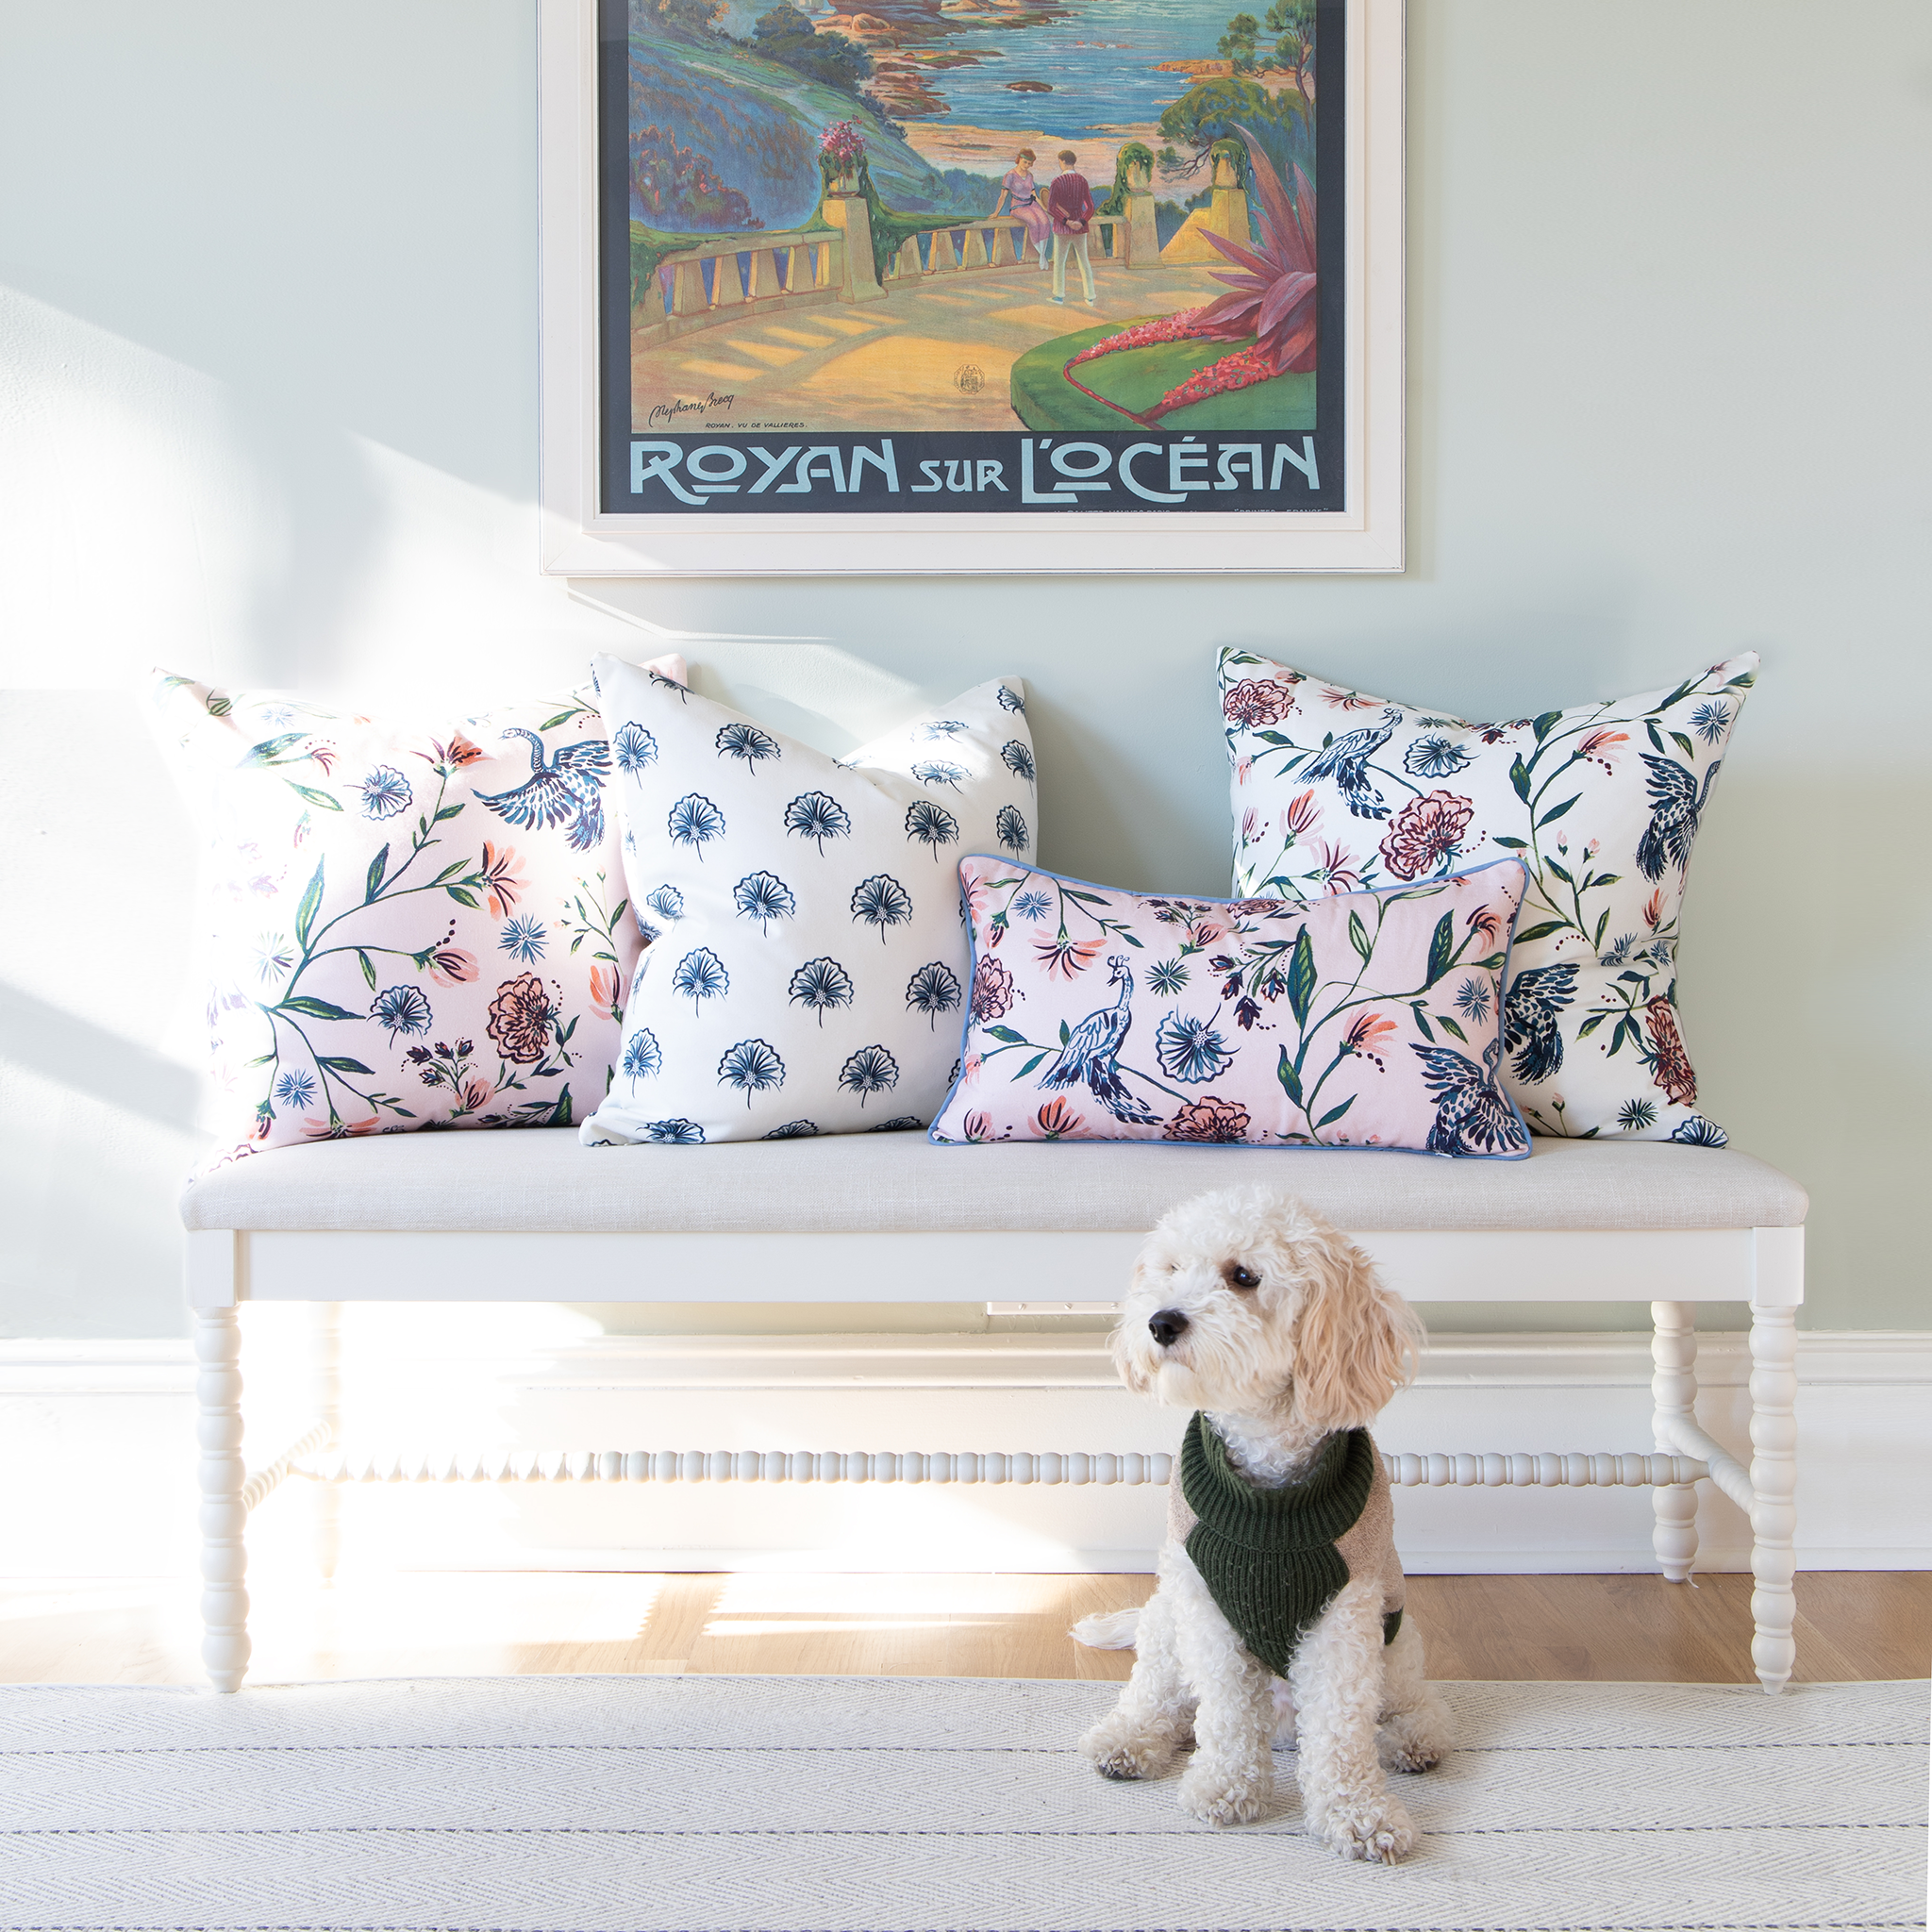 Space styled with Cream Chinoiserie, Rose Chinoiserie, and Floral Navy pillows on white bench with dog wearing a green vest in front of wall with painting